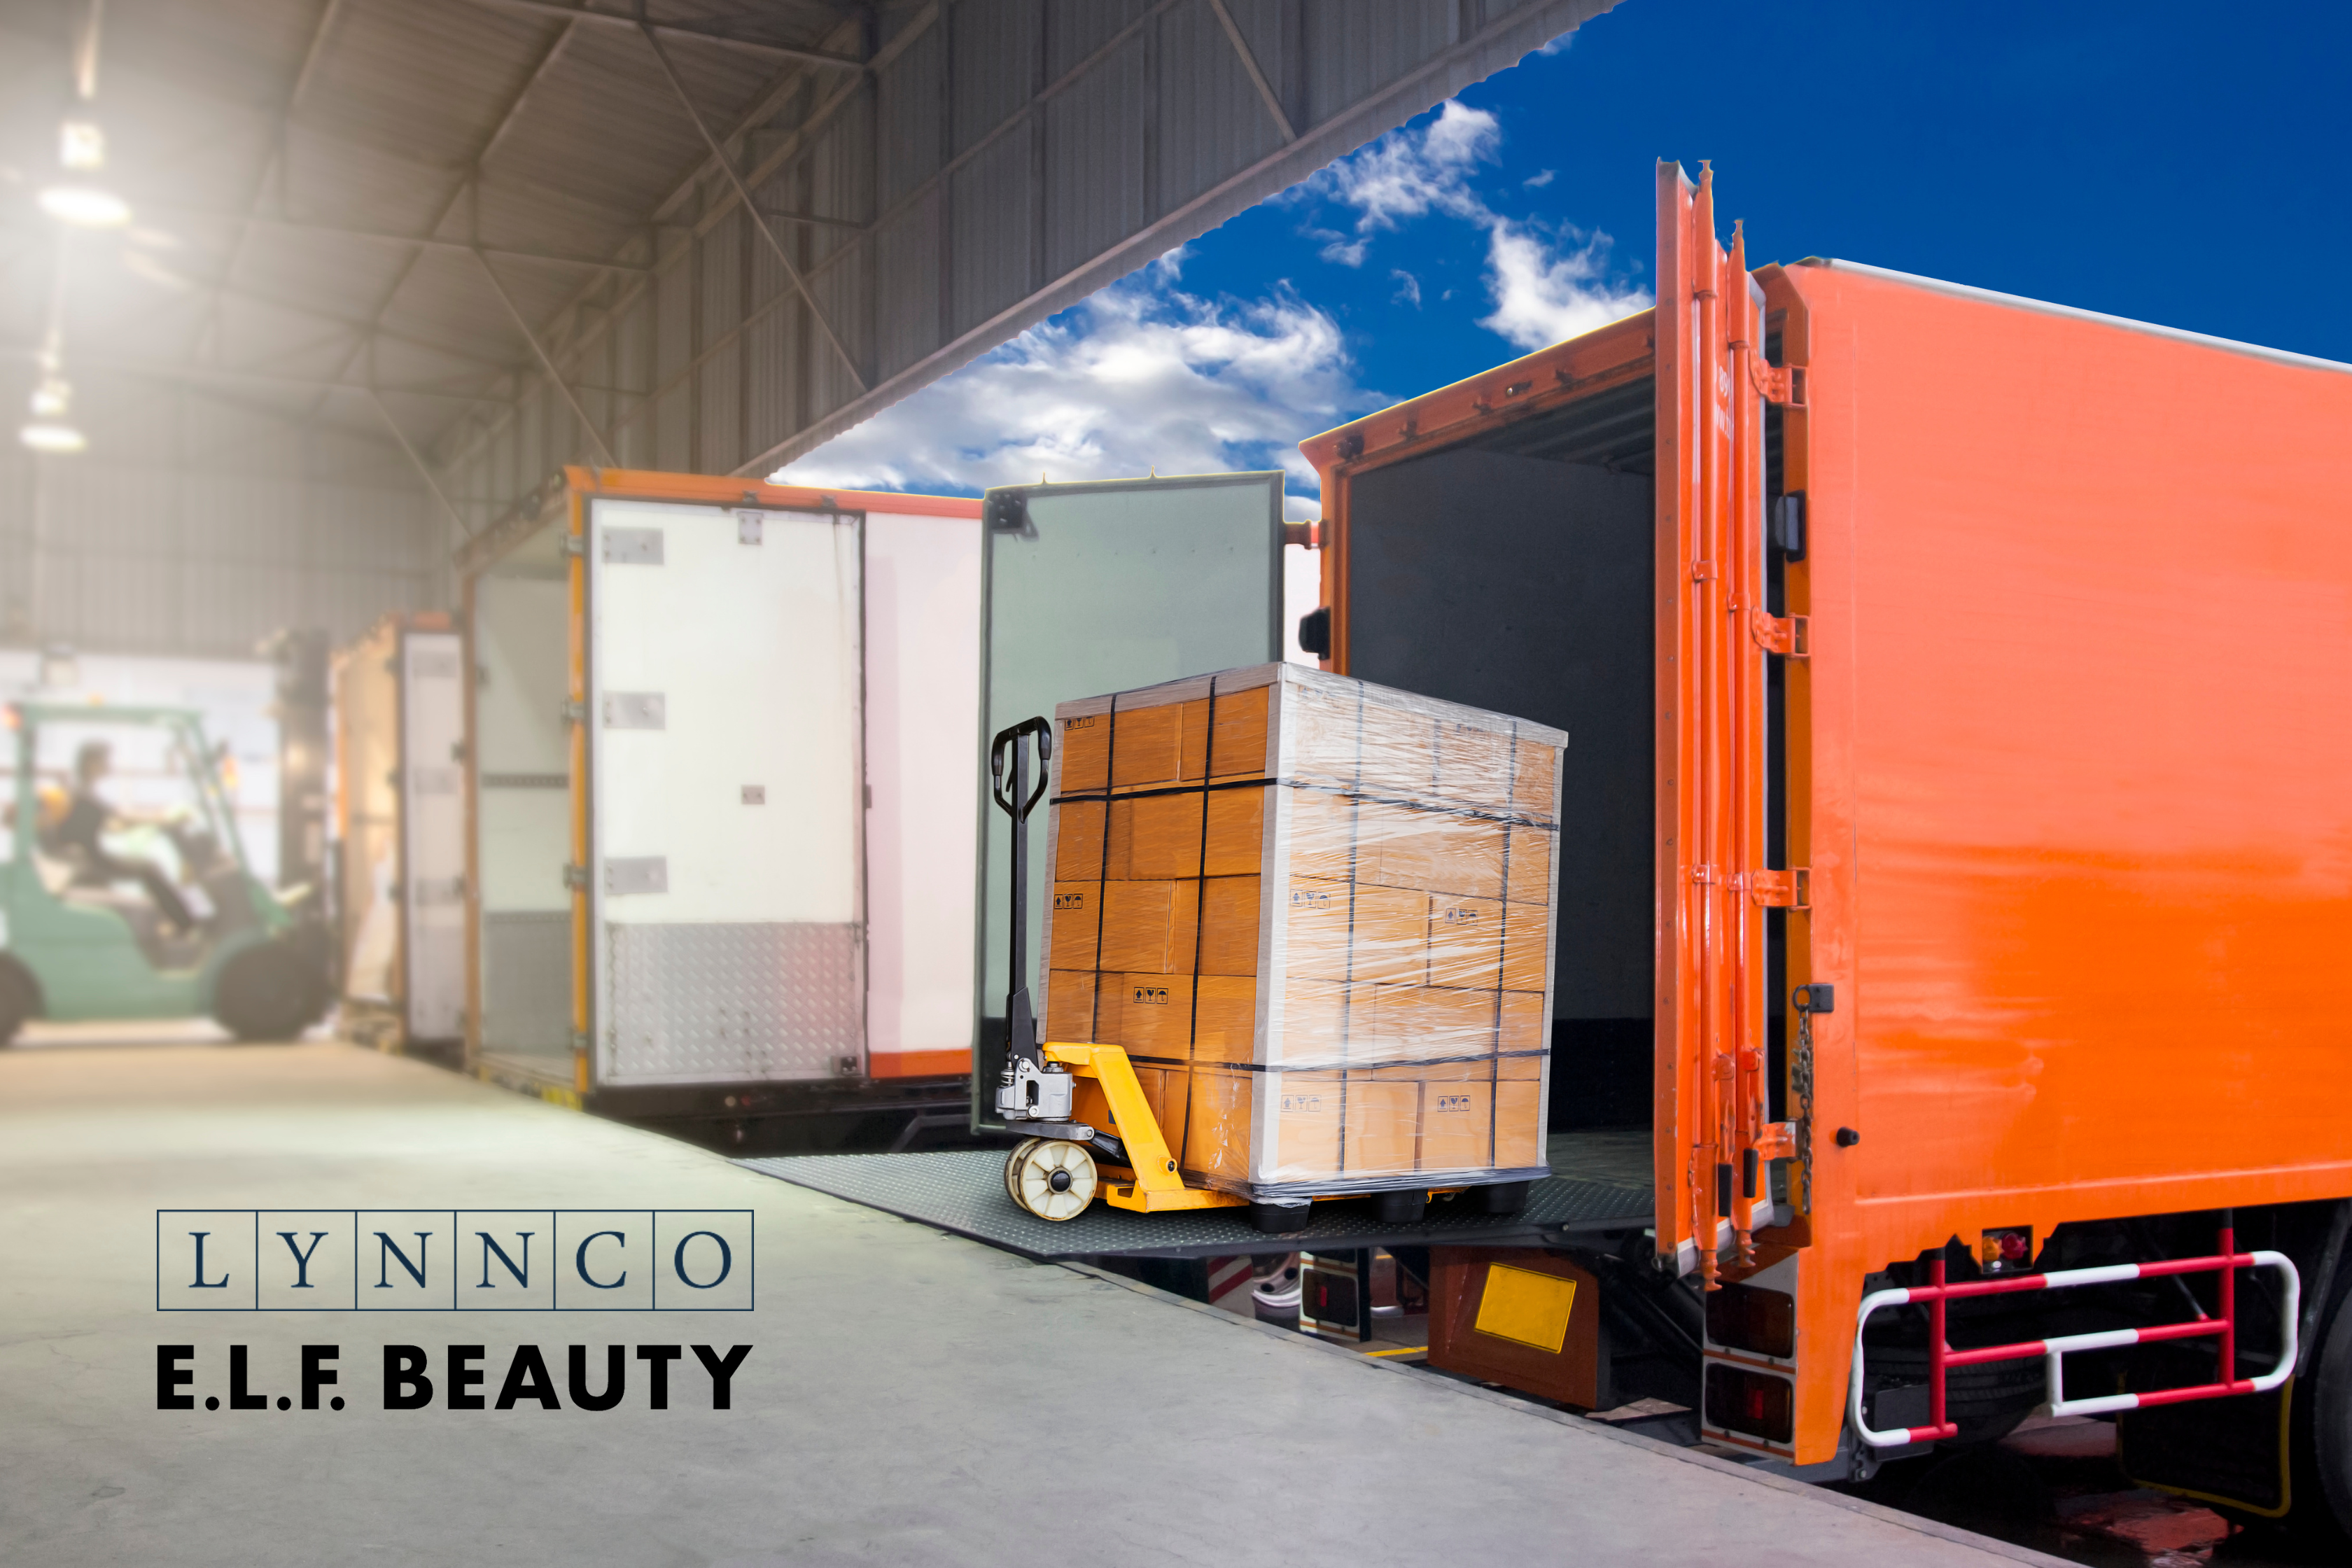 Explore how LynnCo helped e.l.f. Beauty revamp their logistics strategy and mitigate cost increases in a remarkably short span of six months.